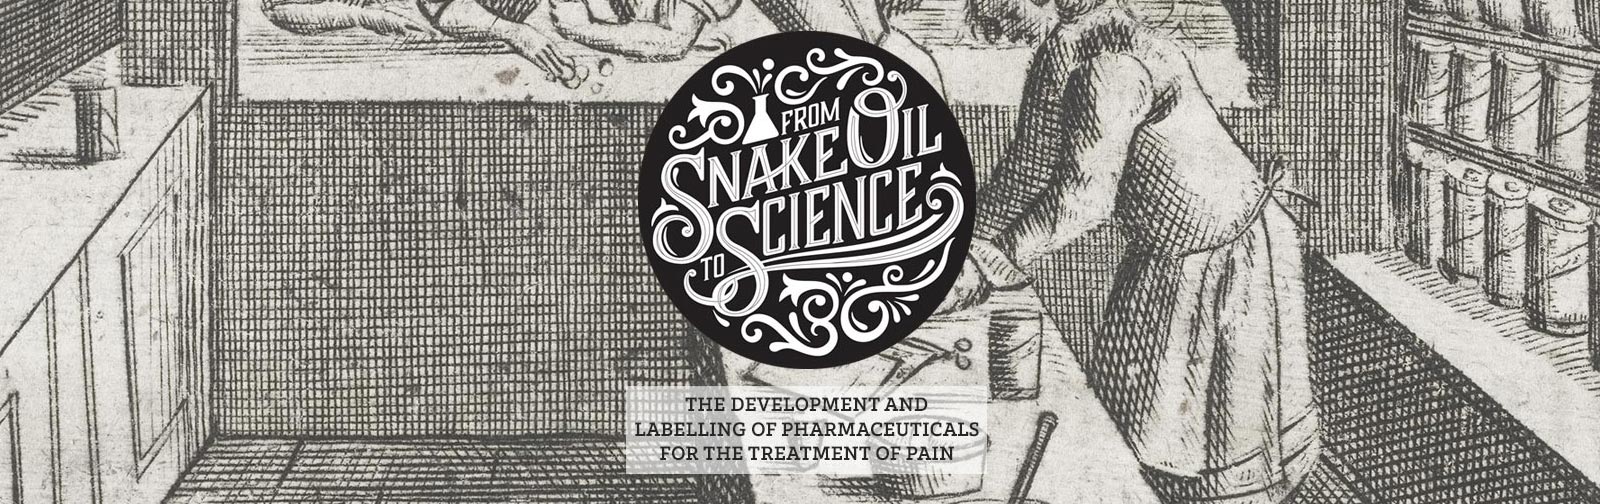 Snake Oil to Science Online Exhibition